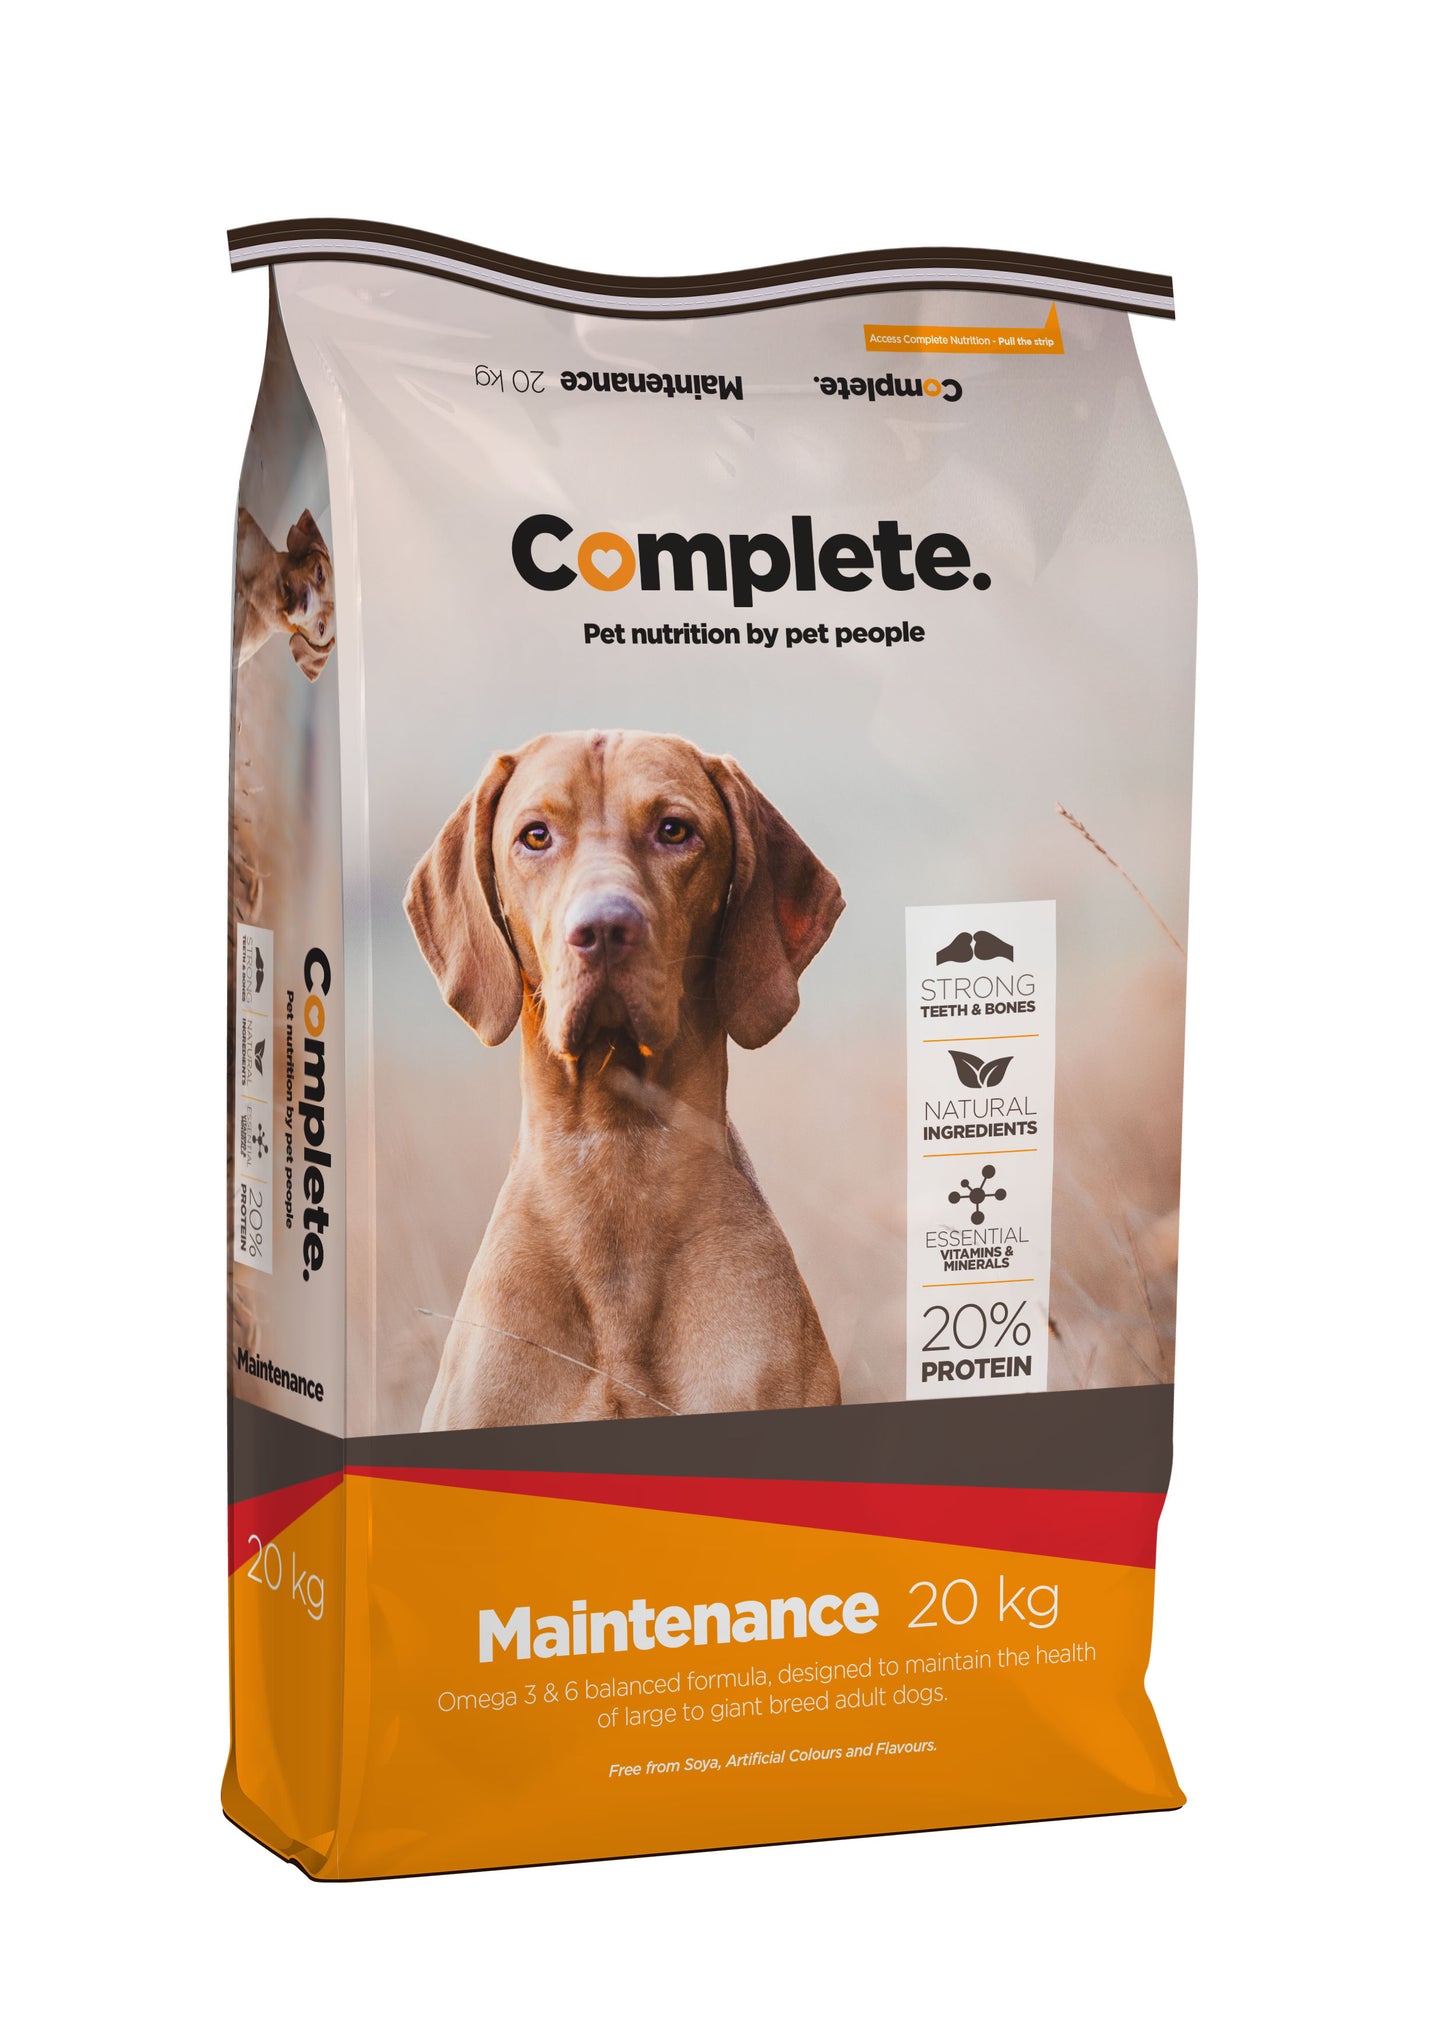 Maintenance 20kg Complete Pet Food For Large & Giant breed adult dogs from Pets Planet - South Africa’s No1 Online Pet Store for premium pet products, best pet store near me, Dog food, pet food, dog wet food, dog bed, dog beds, washable dog bed, takealot dog bed, plush dog bed, Complete Pet Nutrition, Complete pet nutrition dog food, hills dog food, optimizor dog food, royal canin dog food, jock dog food, bobtail dog food, canine cuisine, acana dog food, best dog food, dog food near me, best dog food brands